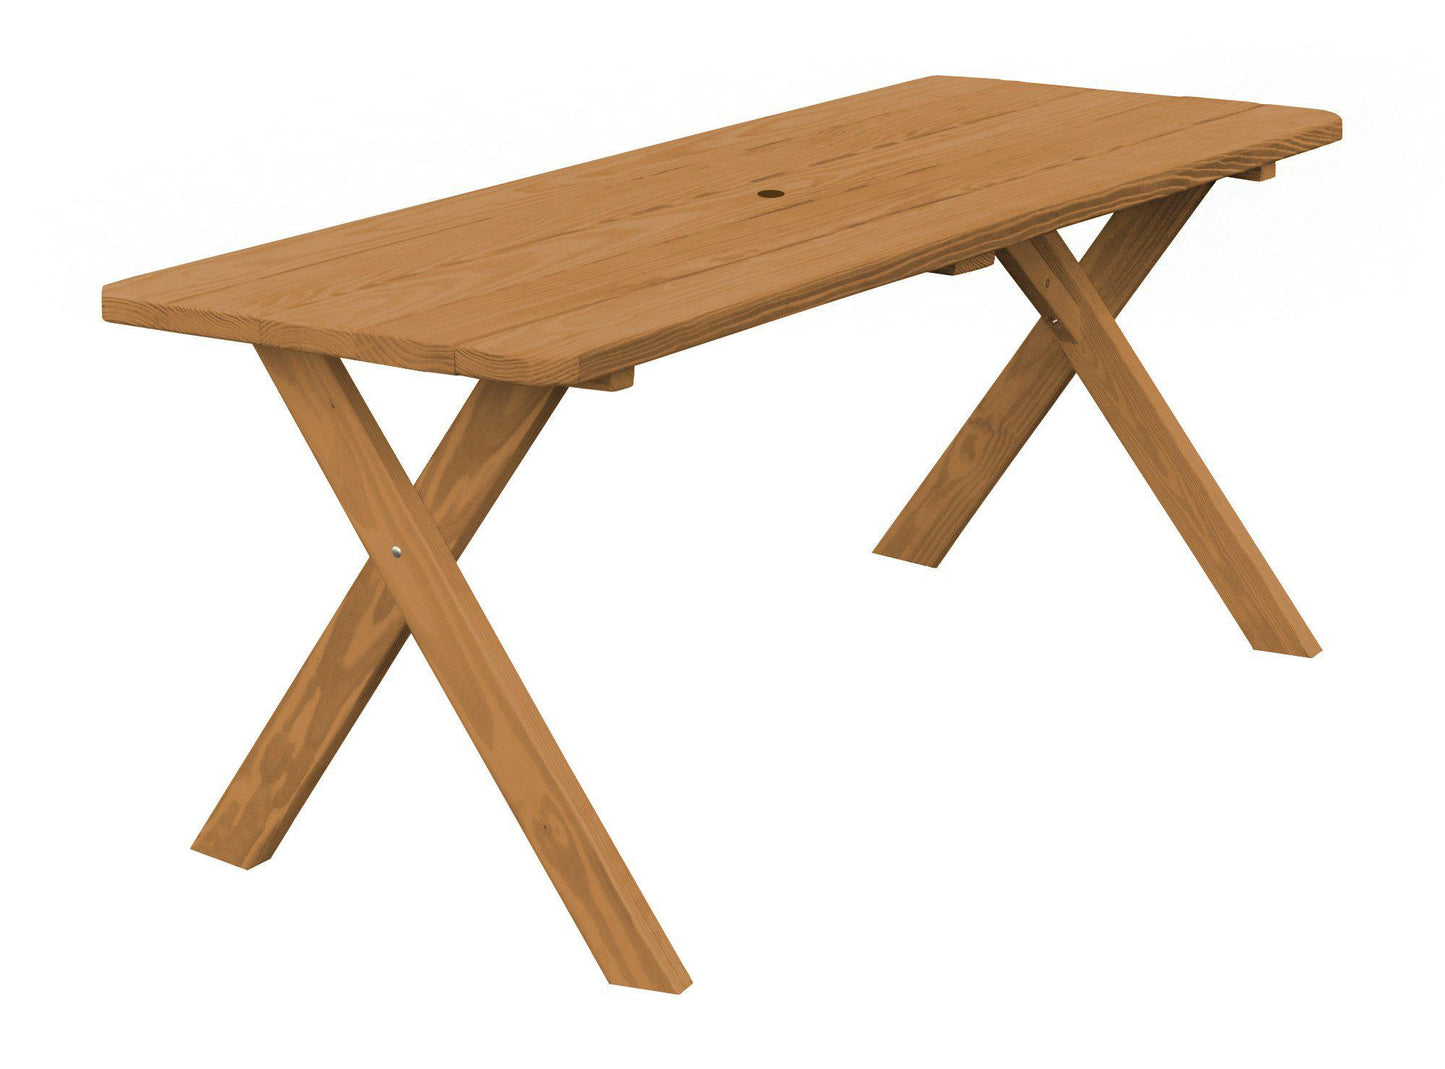 A&L Furniture Co. Yellow Pine 70" Cross-leg Table Only - Specify for Free 2" Umbrella Hole - LEAD TIME TO SHIP 10 BUSINESS DAYS